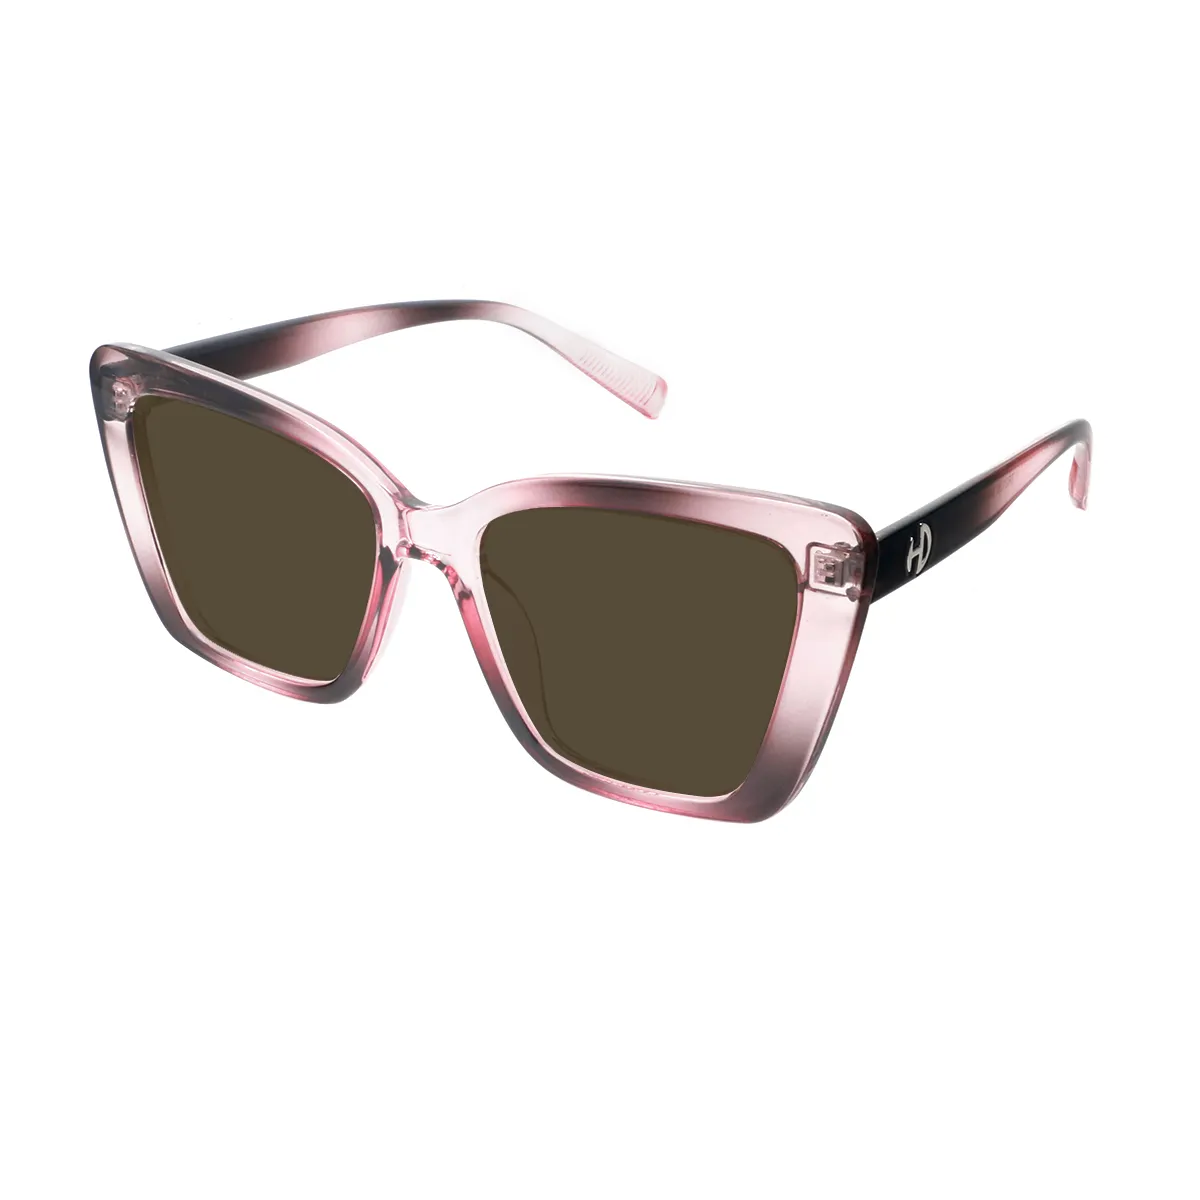 Madonna - Square Pink Sunglasses for Women